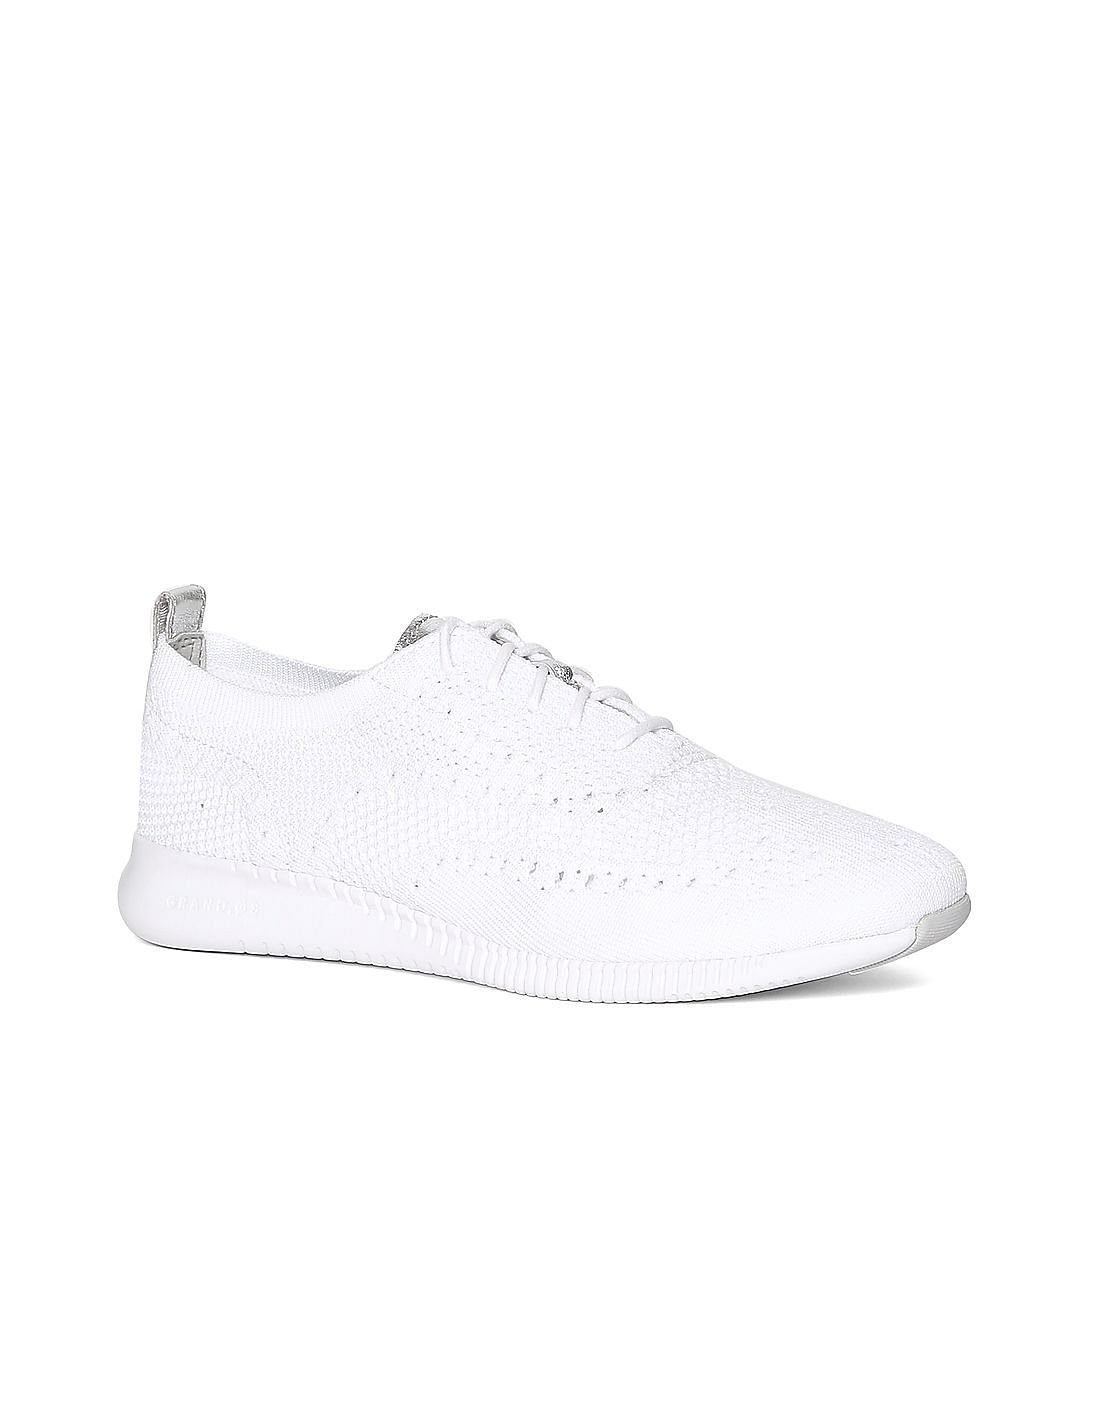 cole haan white sneakers womens